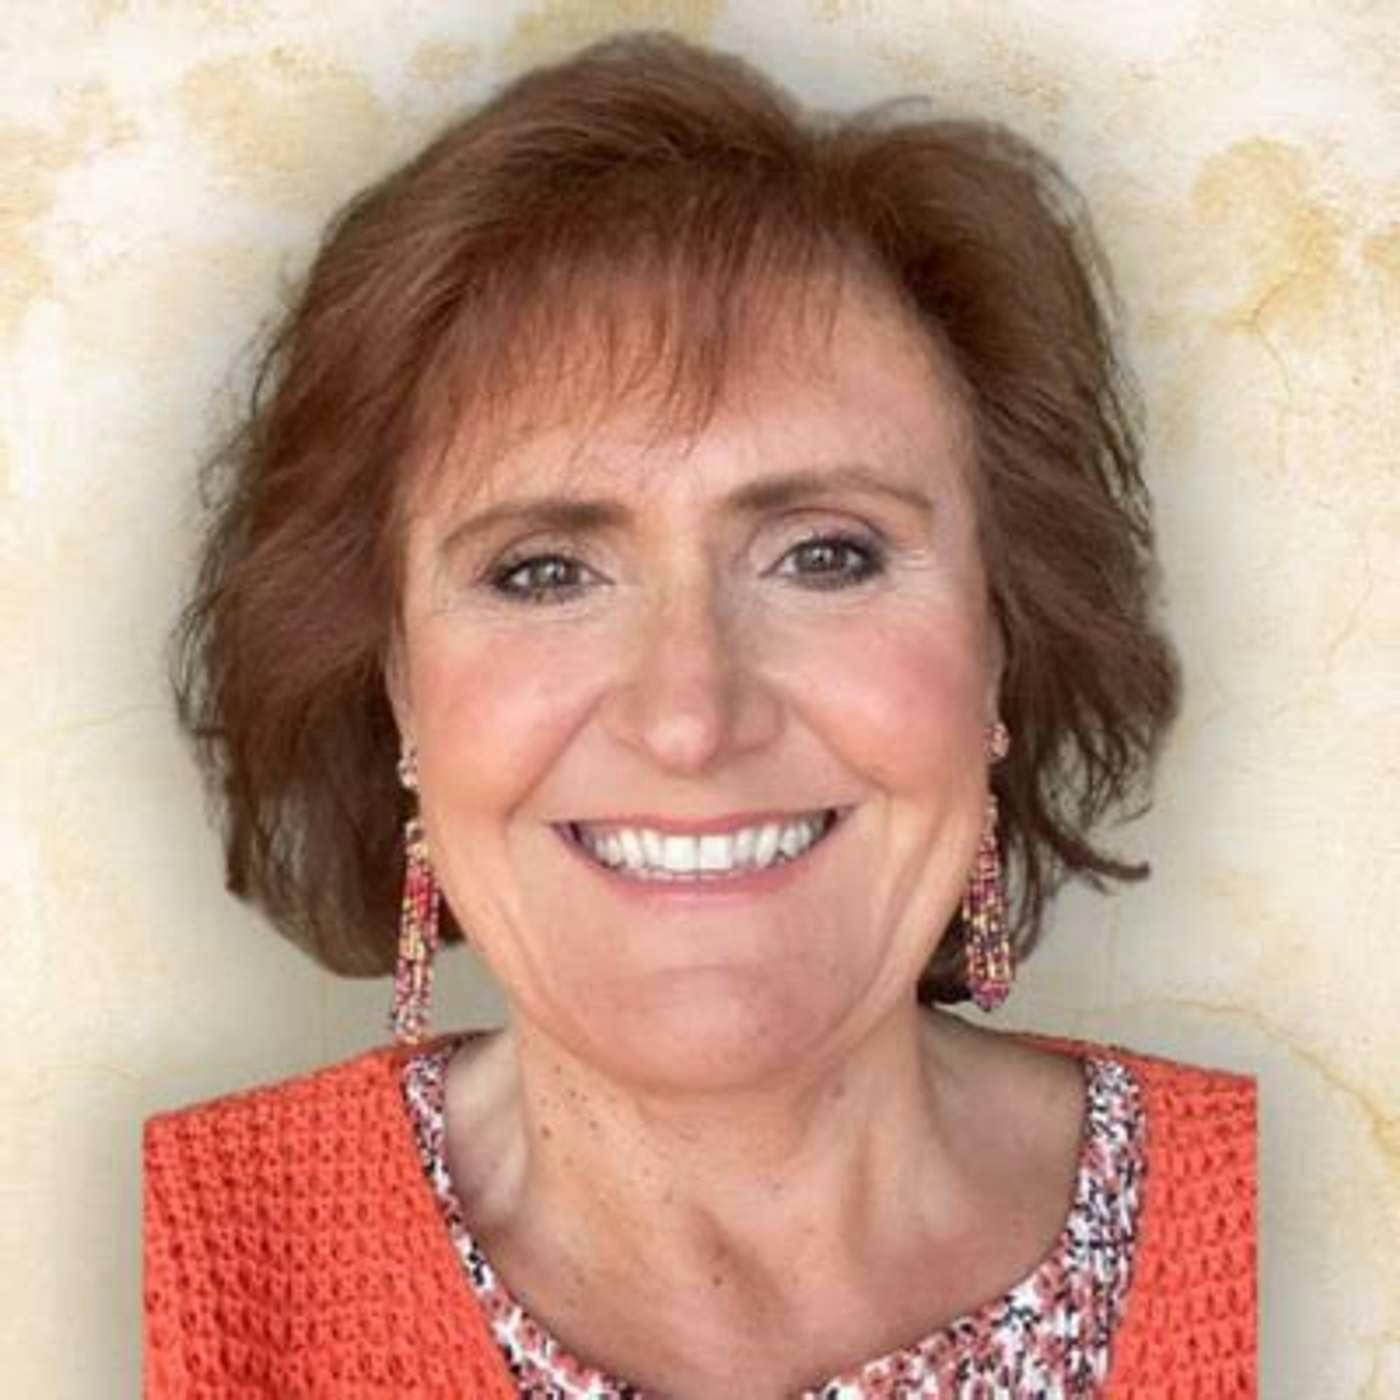 Episode 427- Journey of Faith: From Medjugorje to Ministry - A Conversation with Ann Vucic